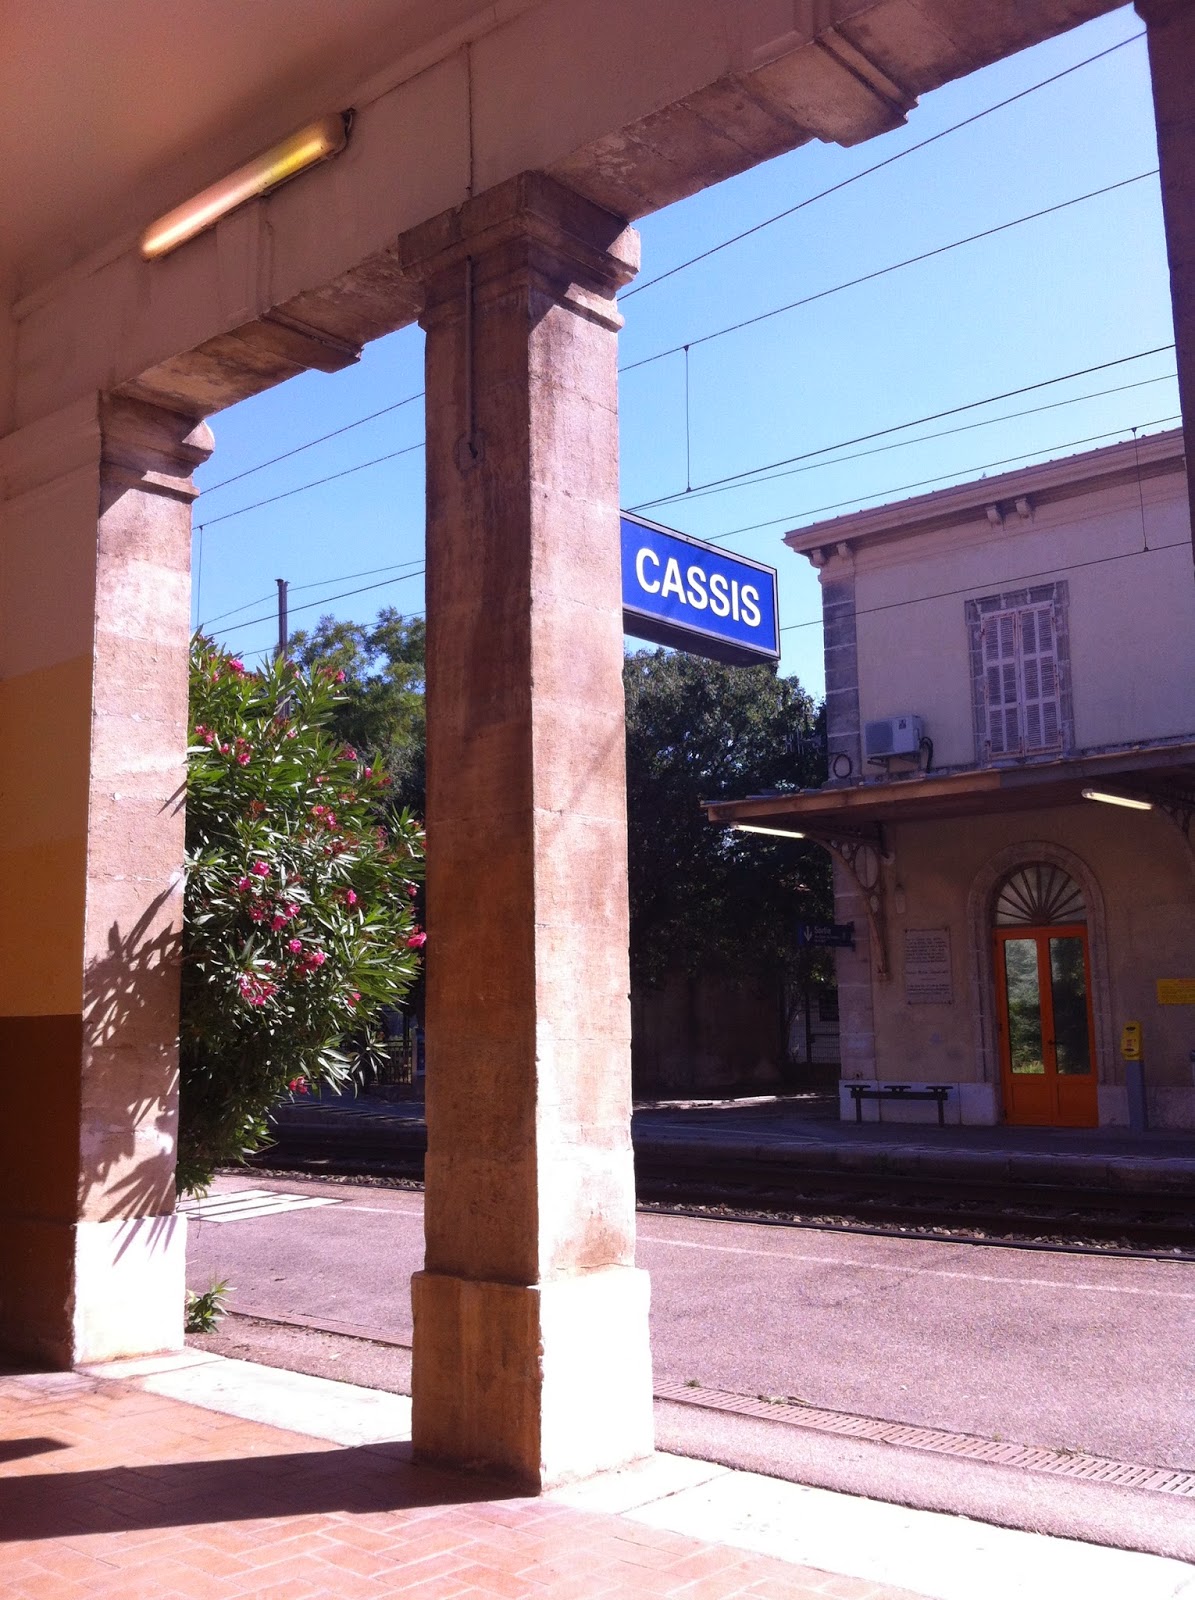 Train station, Cassis